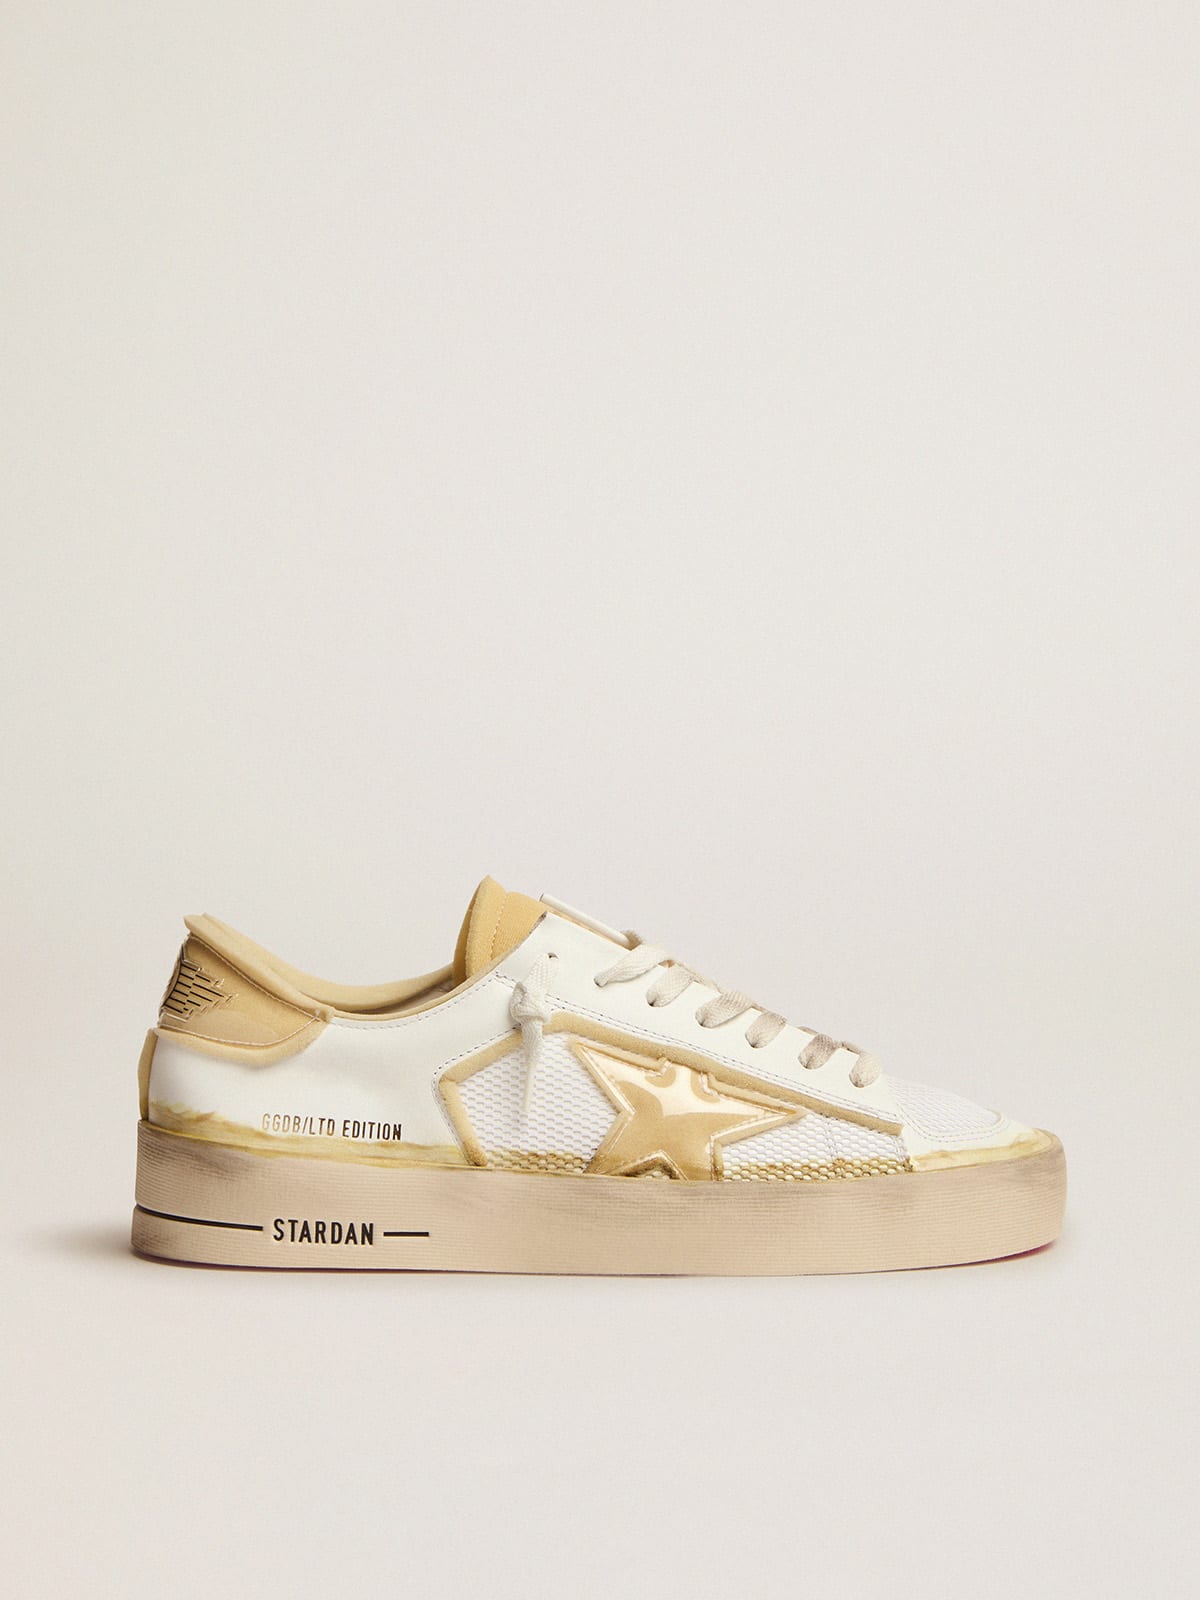 Men's Stardan LAB sneakers in white leather with foam and PVC inserts